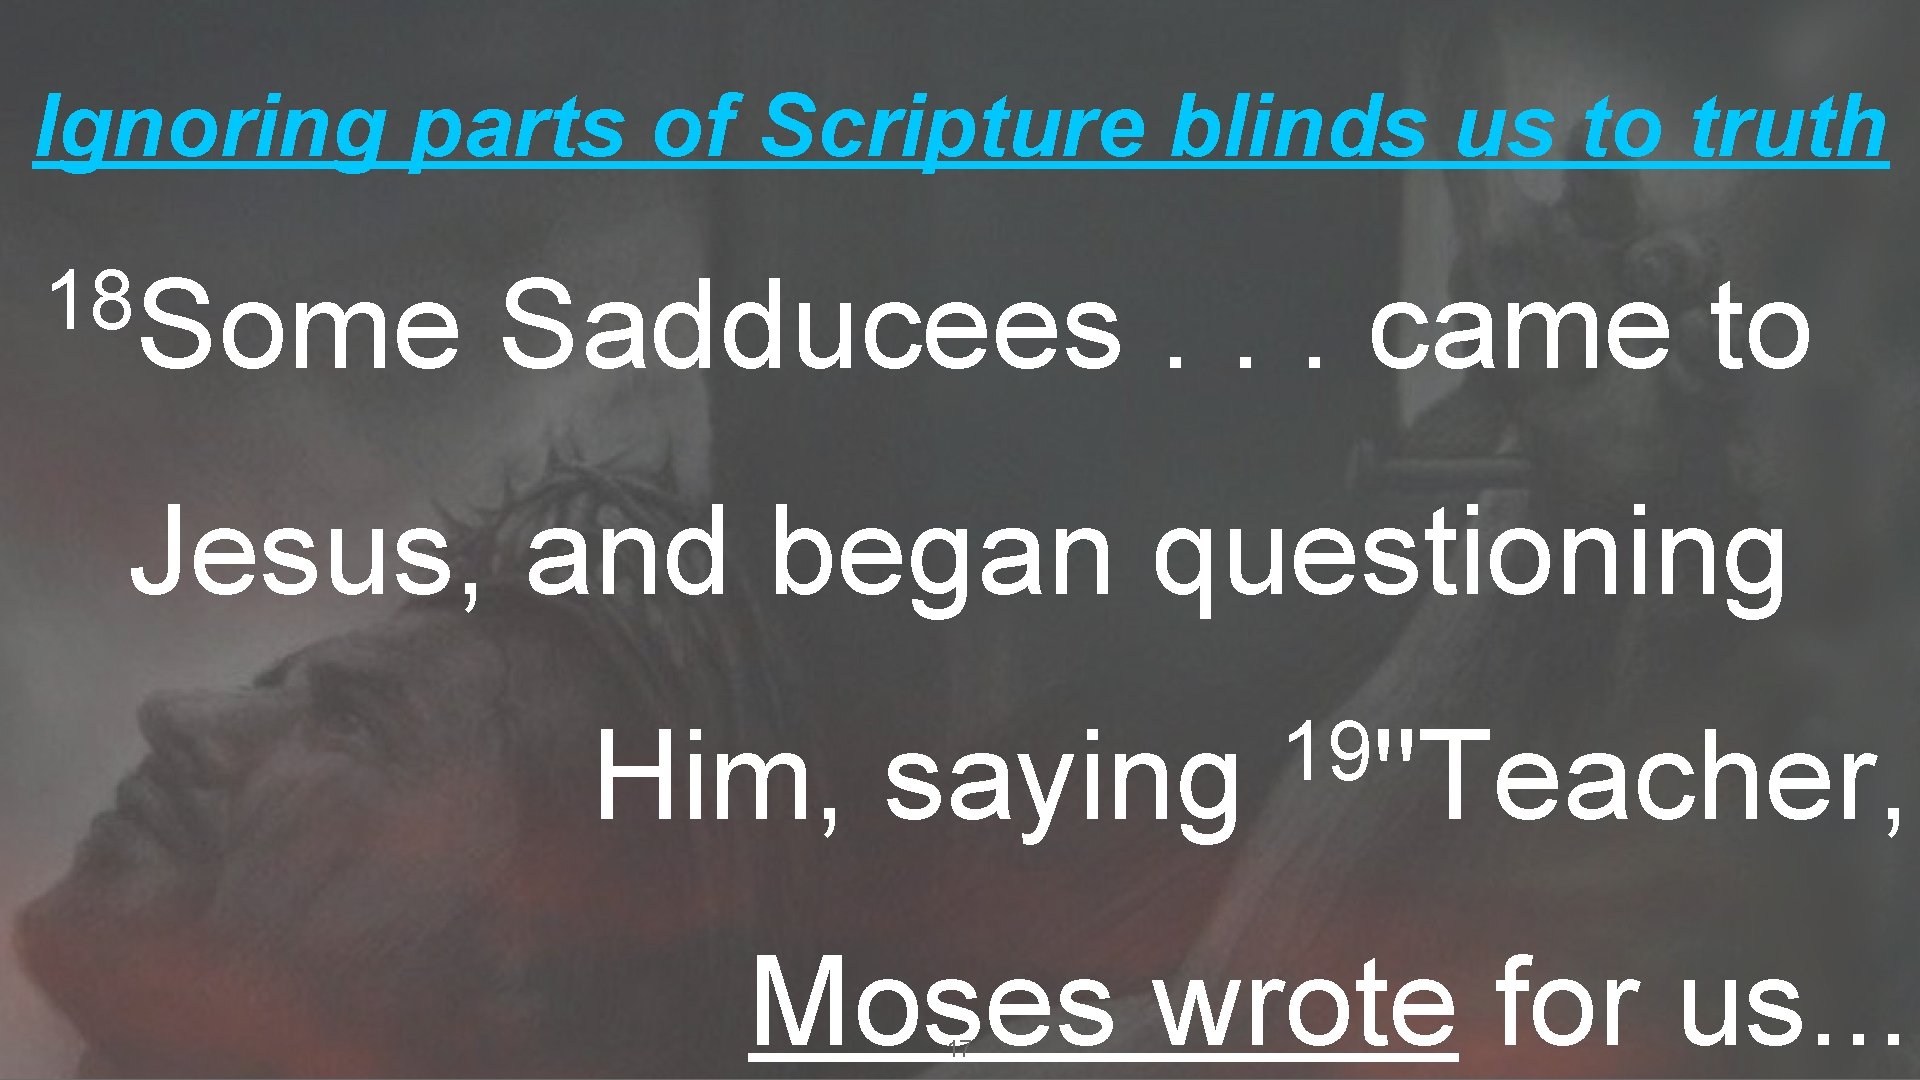 Ignoring parts of Scripture blinds us to truth 18 Some Sadducees. . . came